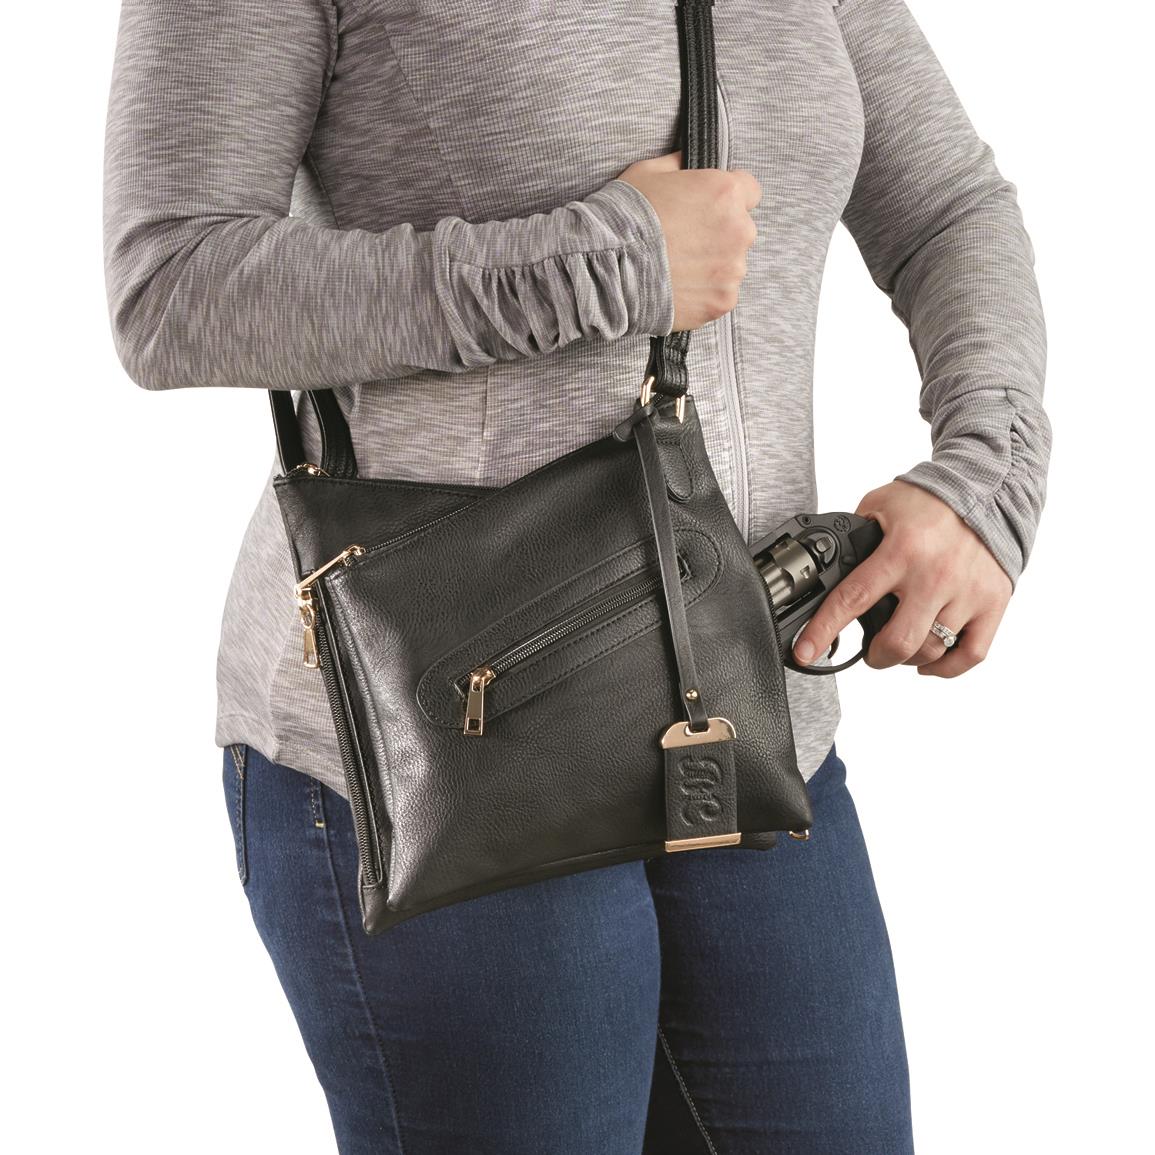 Bulldog Cross Body Concealed Carry Purse with Holster, Small - 710429, Purses & Handbags at ...